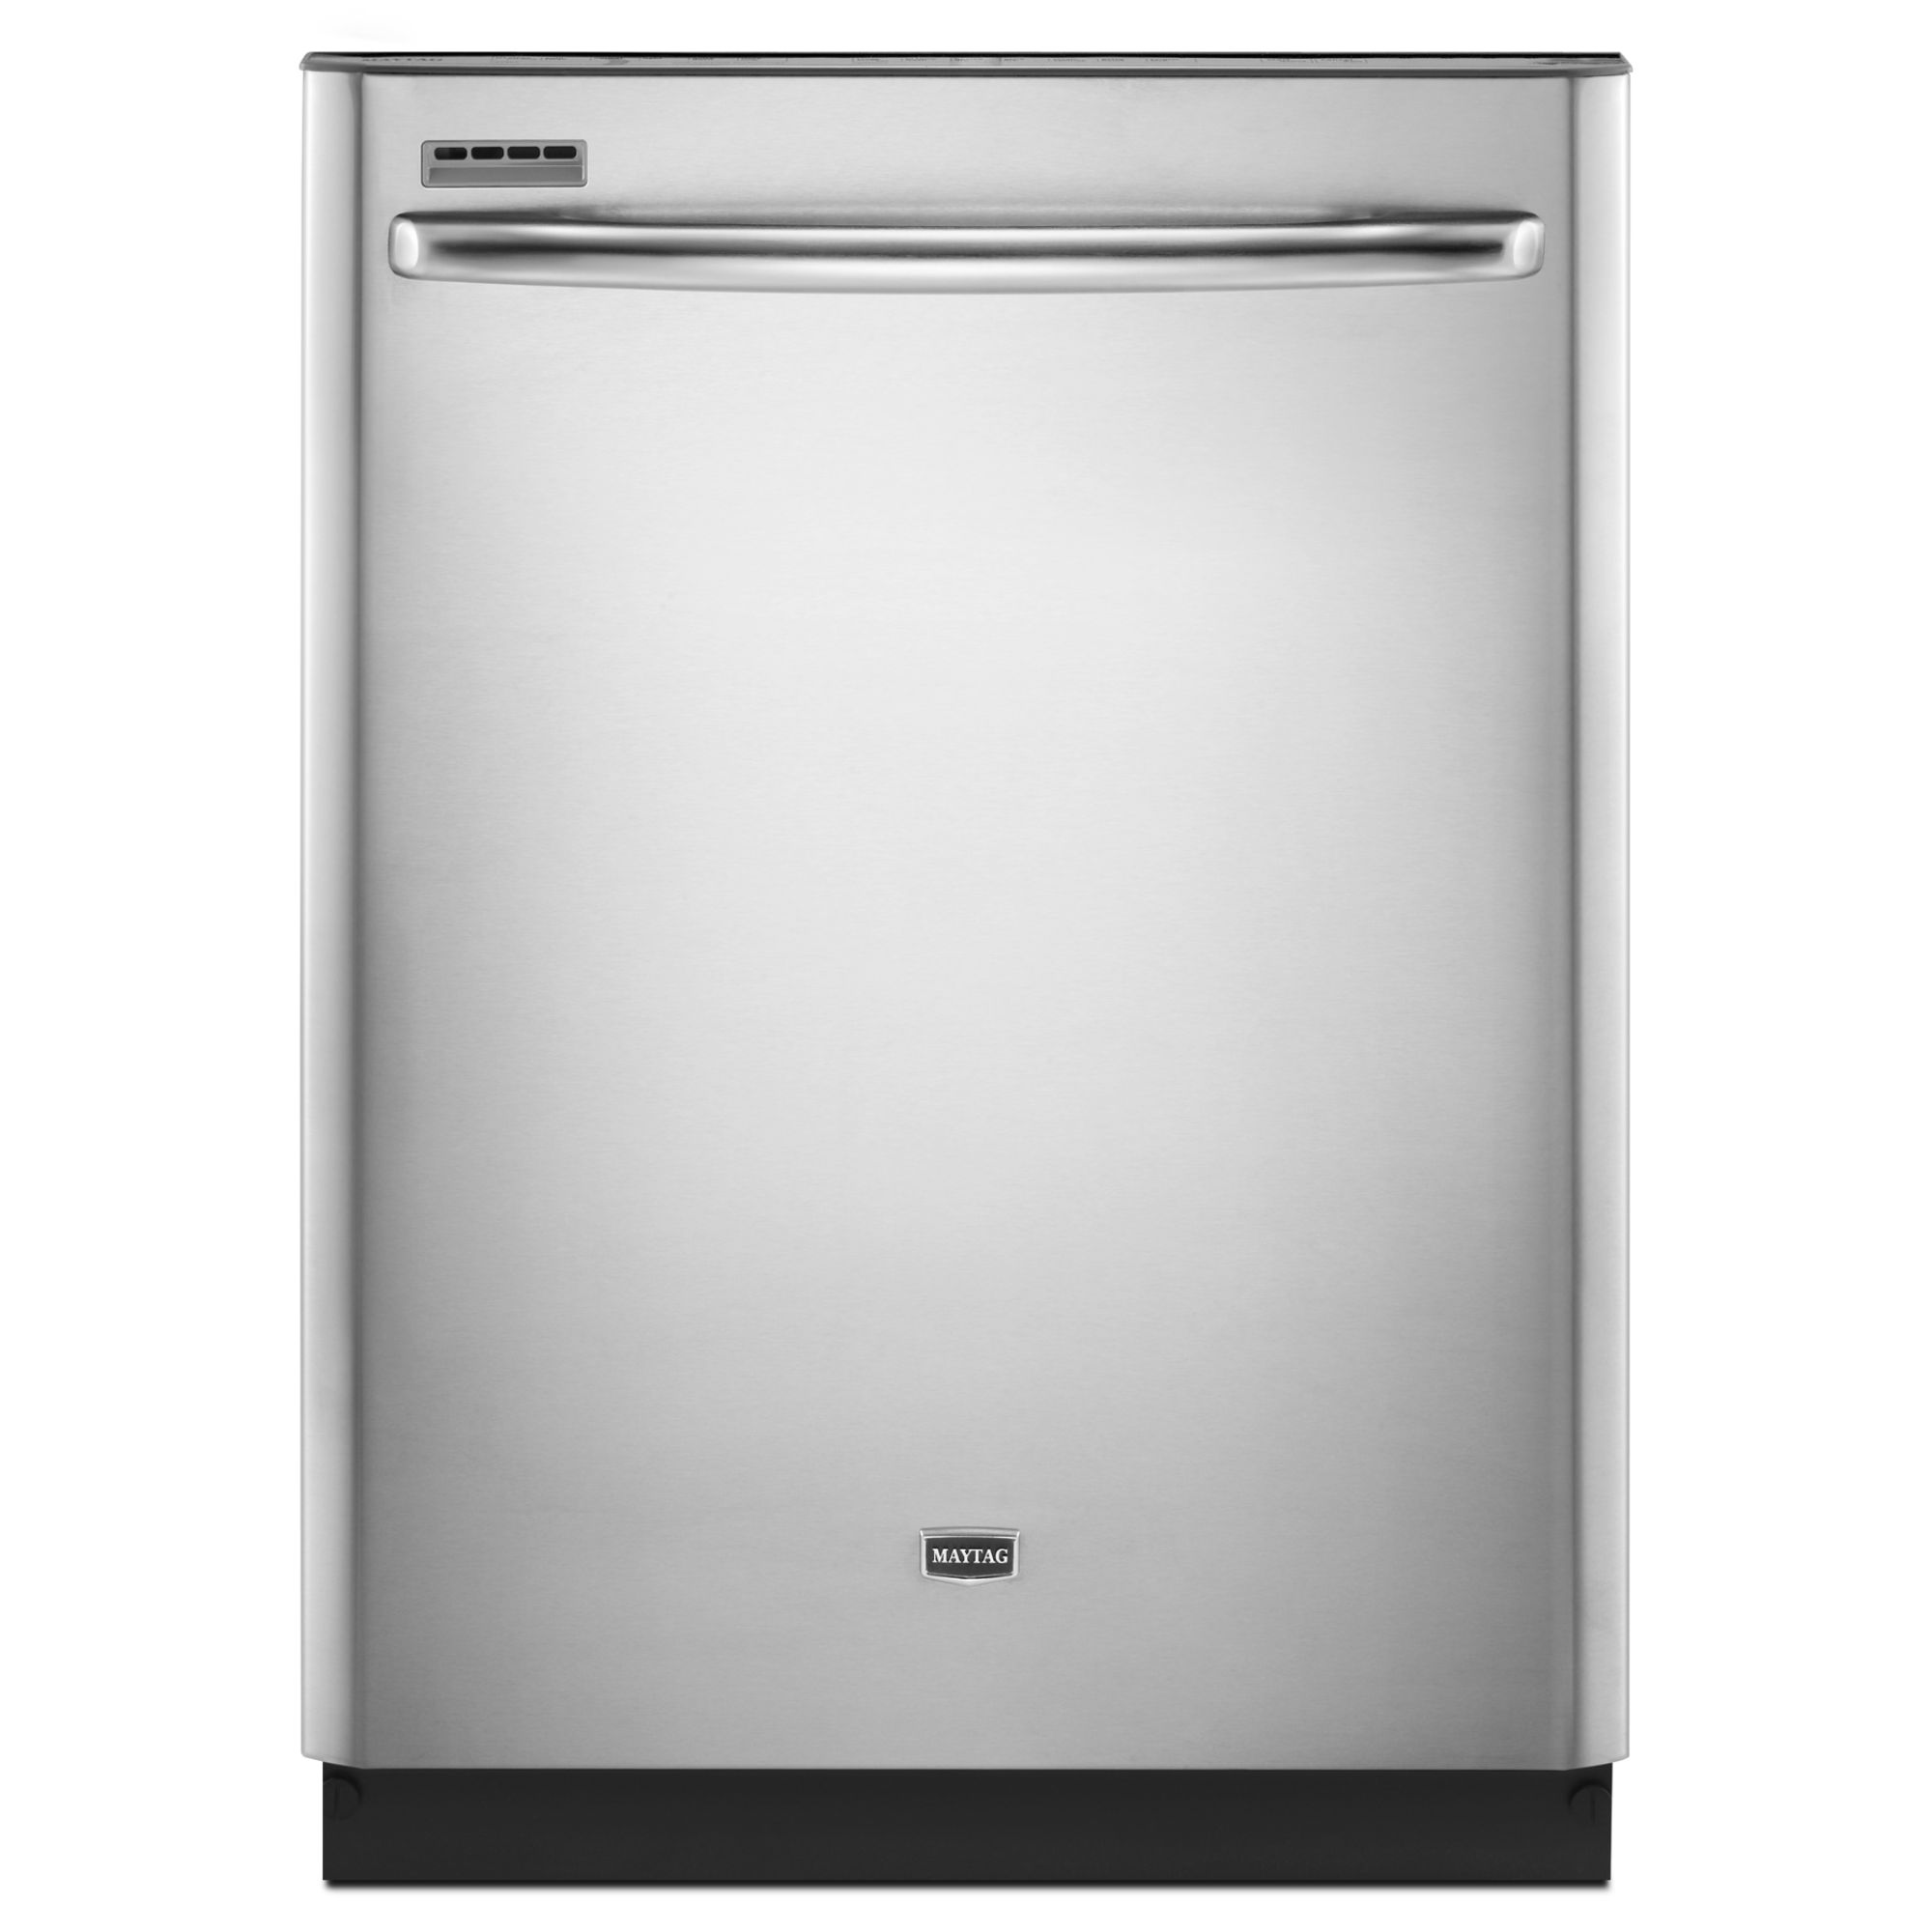 Maytag Stainless Steel Jetclean Plus Built-In Dishwasher - MDB6769PAS